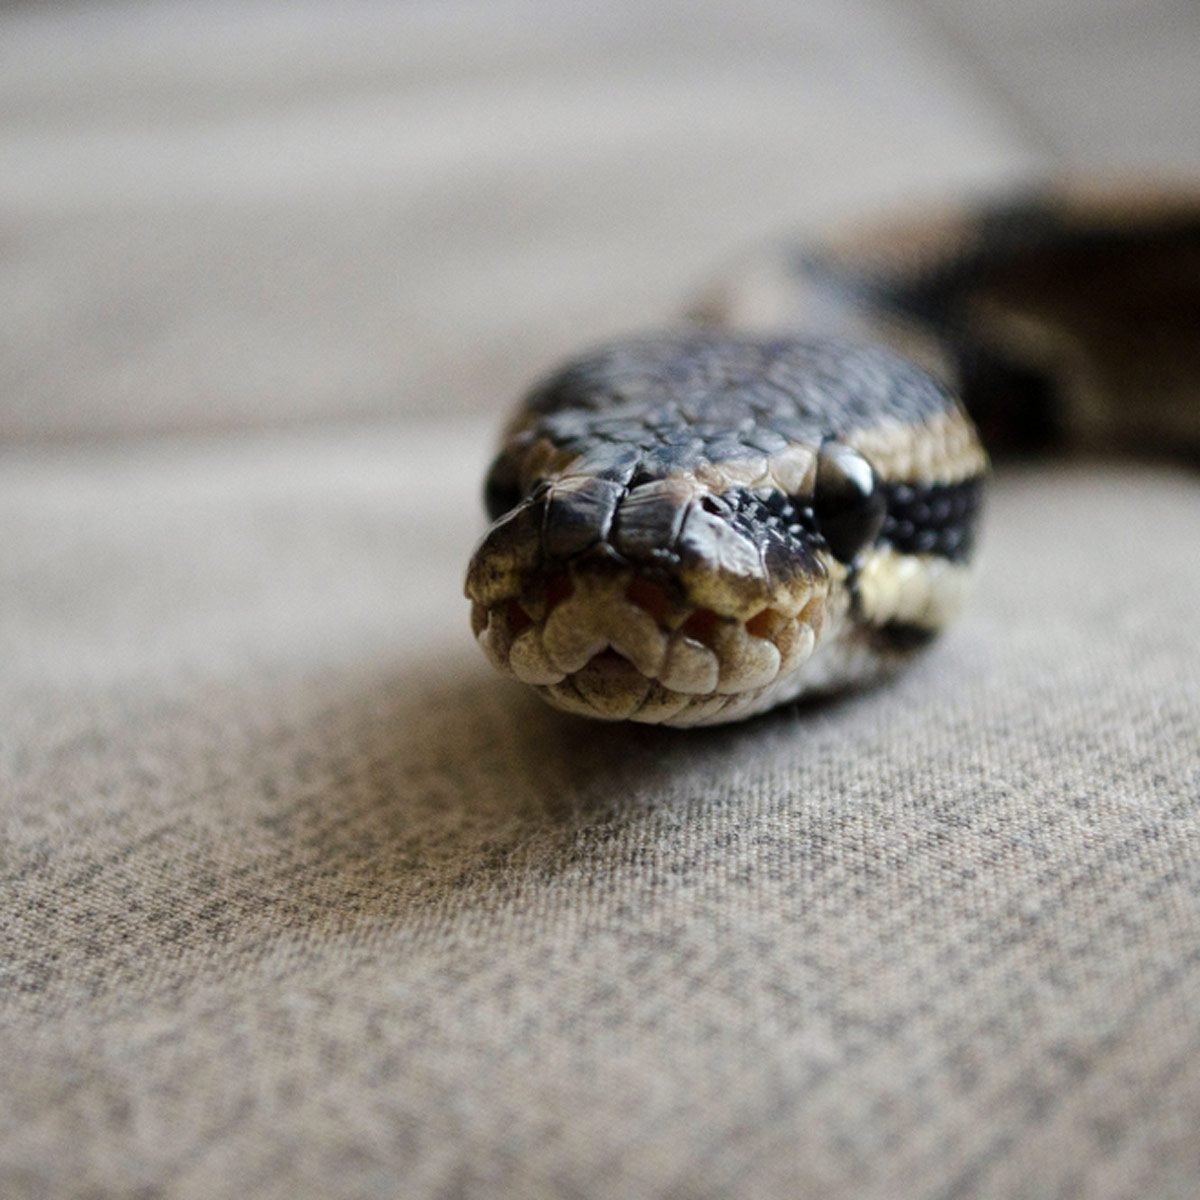 Snake season is here. Tips on how to be safe and coexist.